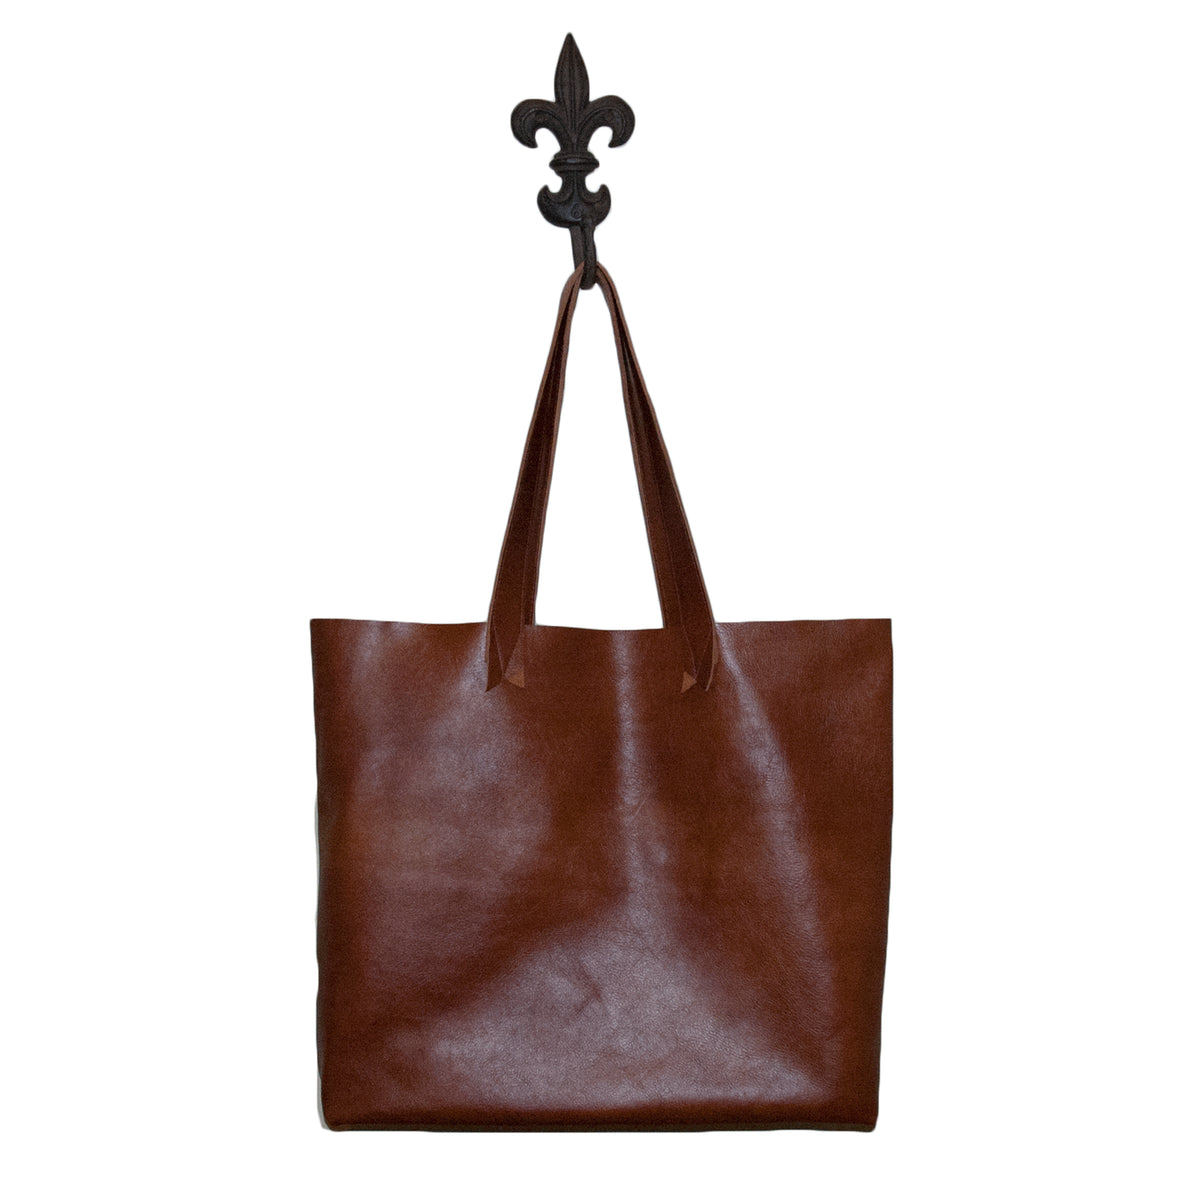 Hand made leather tote bag